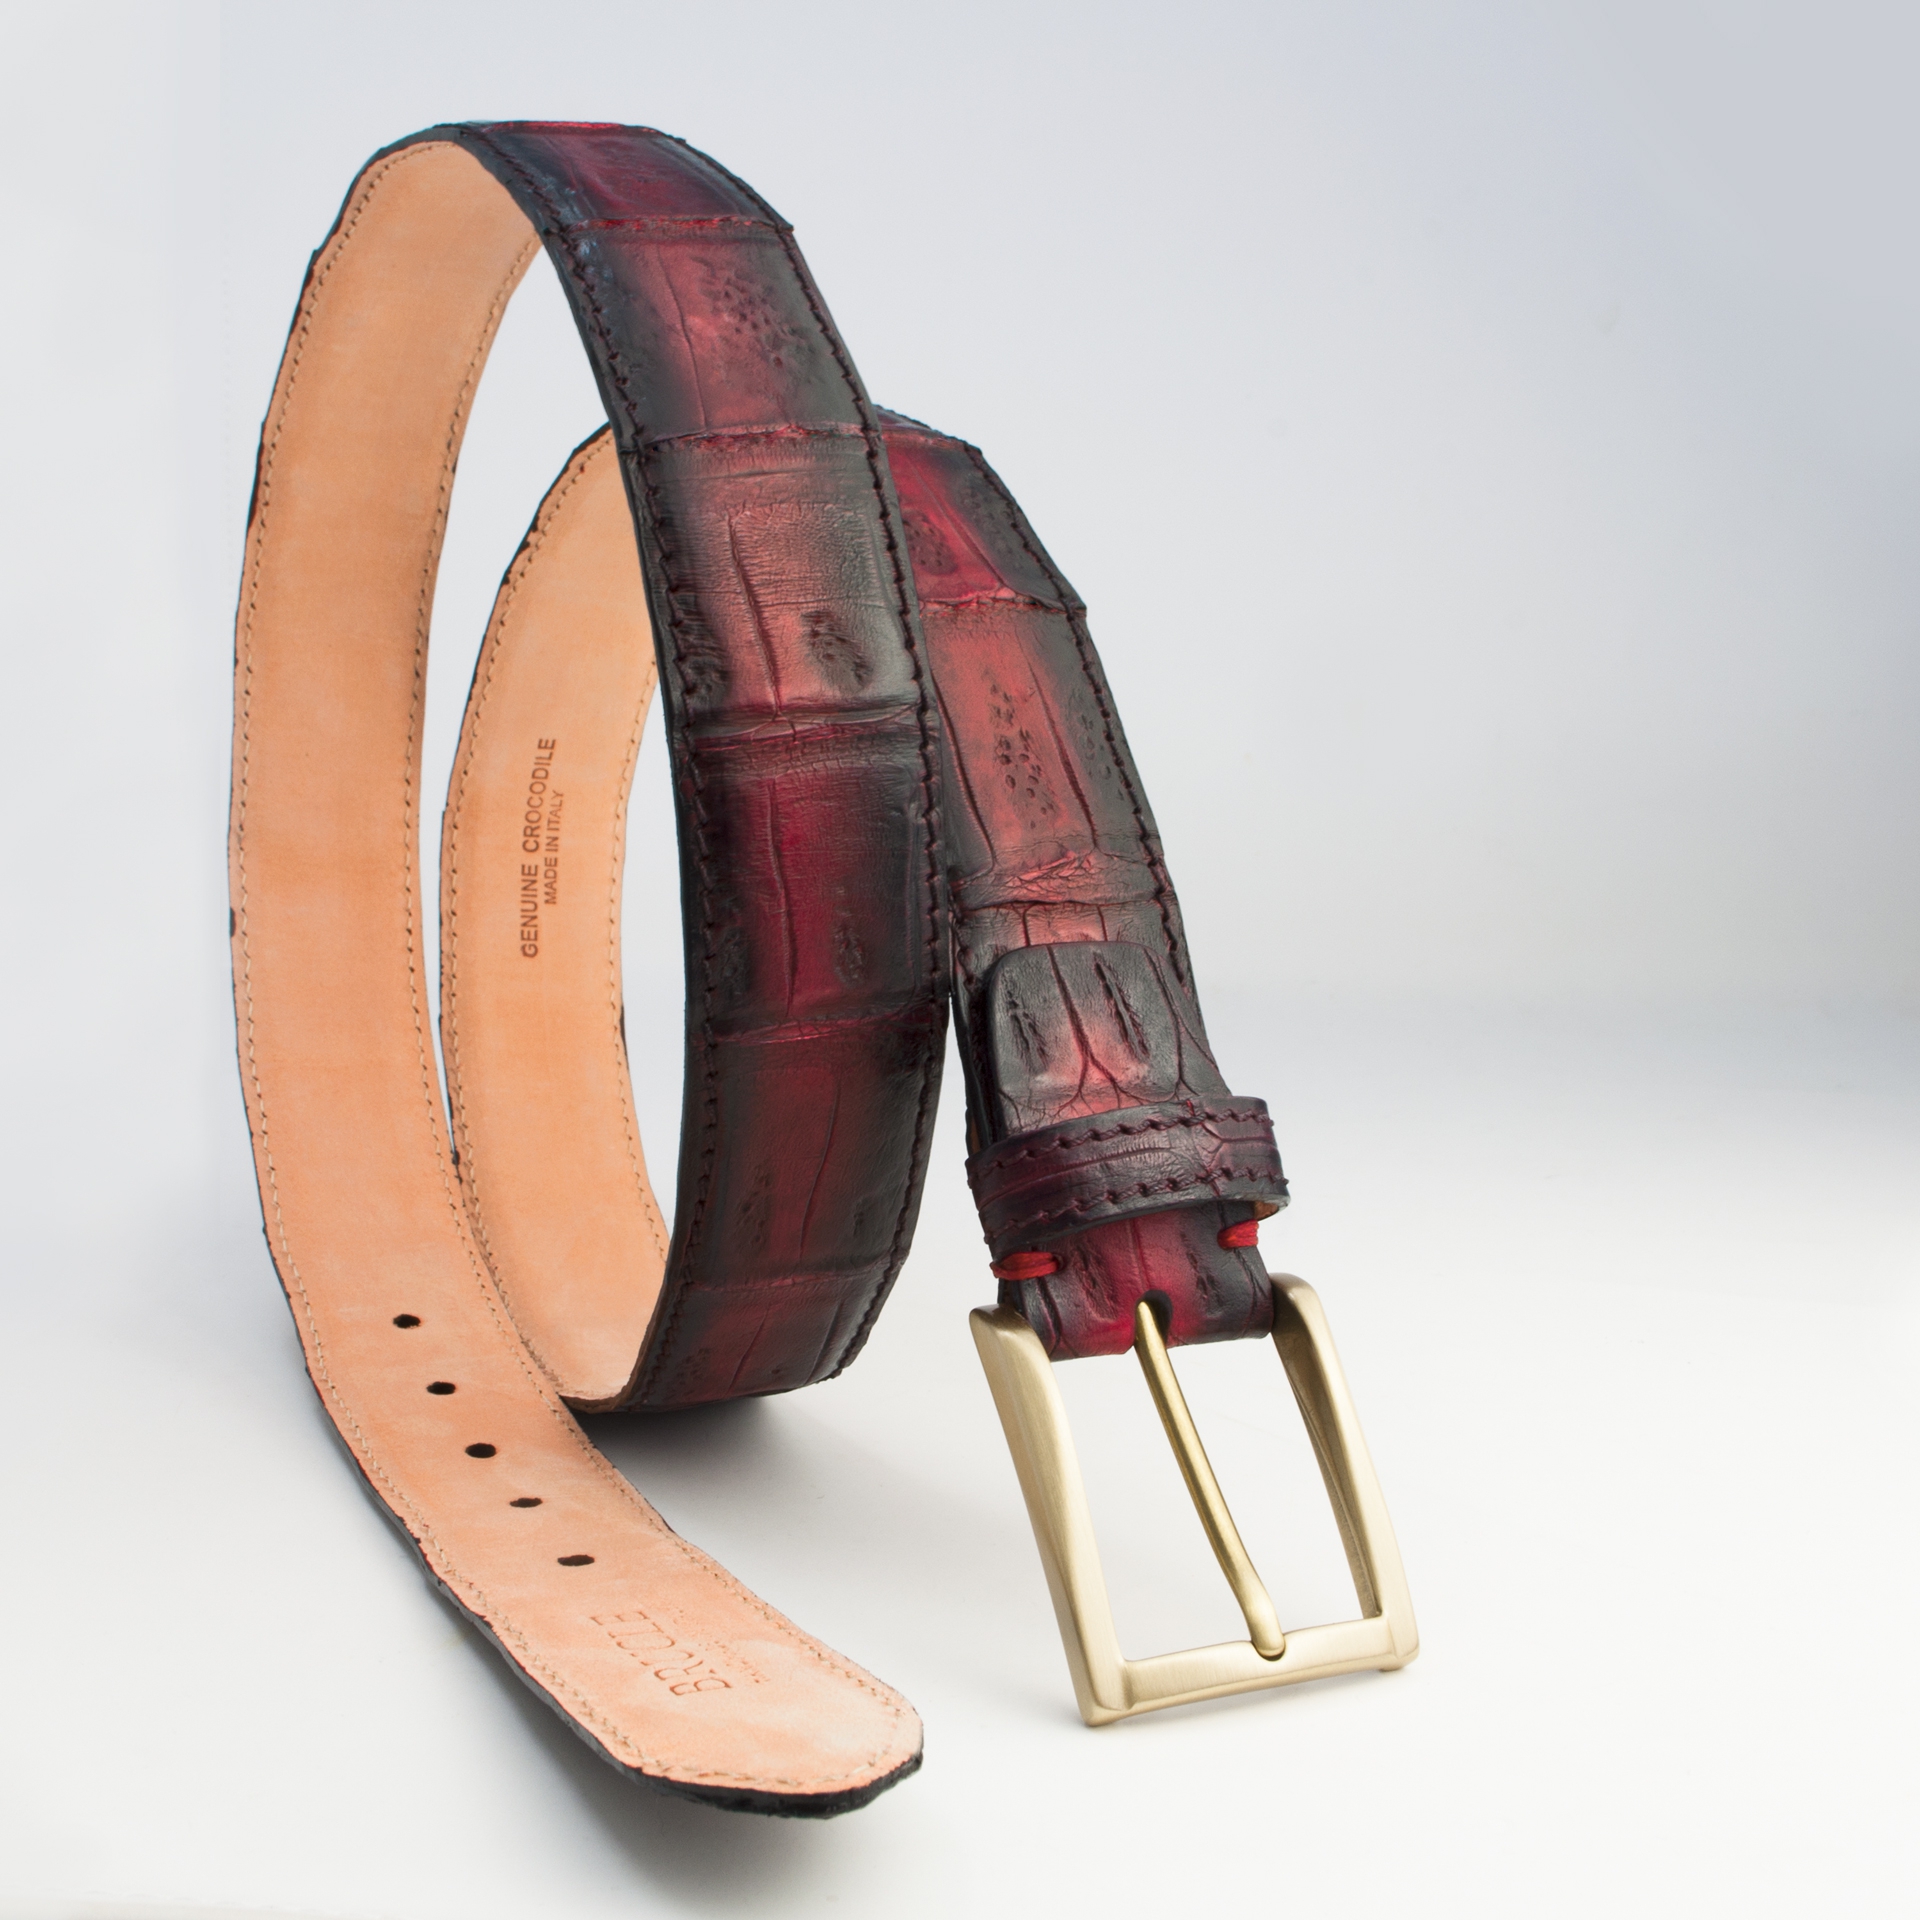 Each crocodile belt by virtue of the entirely handmade workmanship is a unique piece